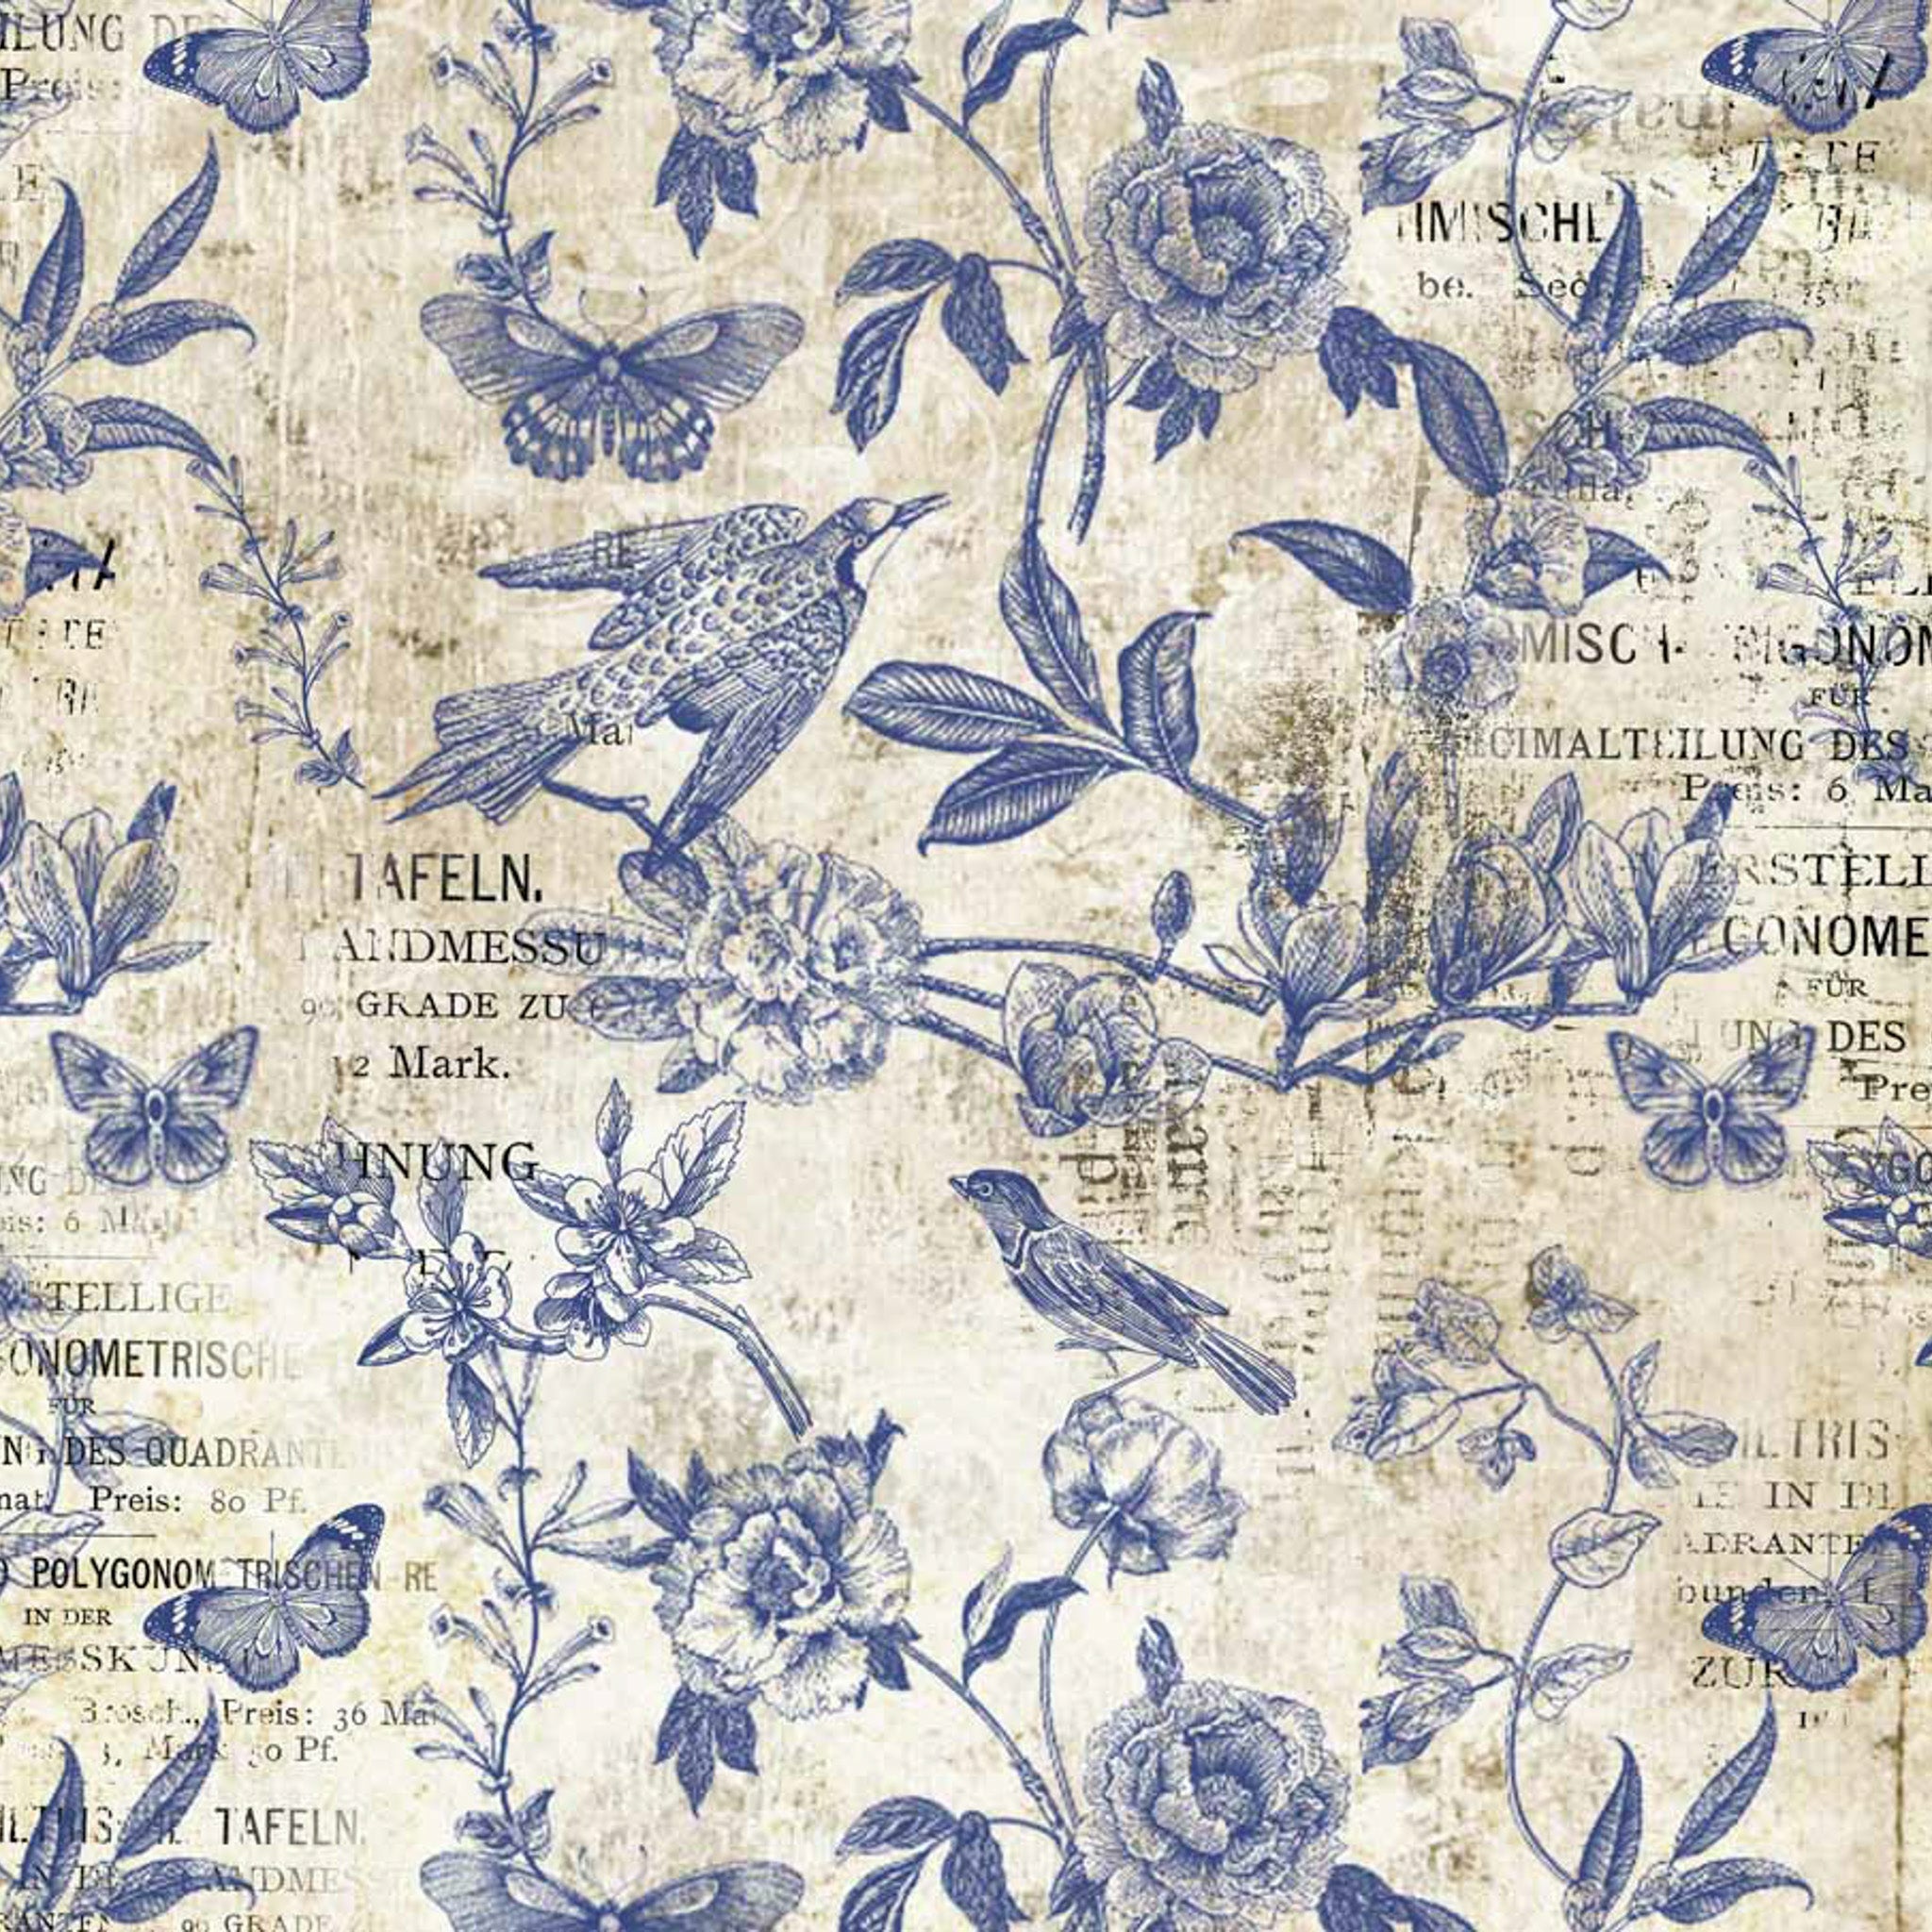 A3 rice paper design that features blue stamped birds, butterflies, and vining flowers on vintage magazine paper.